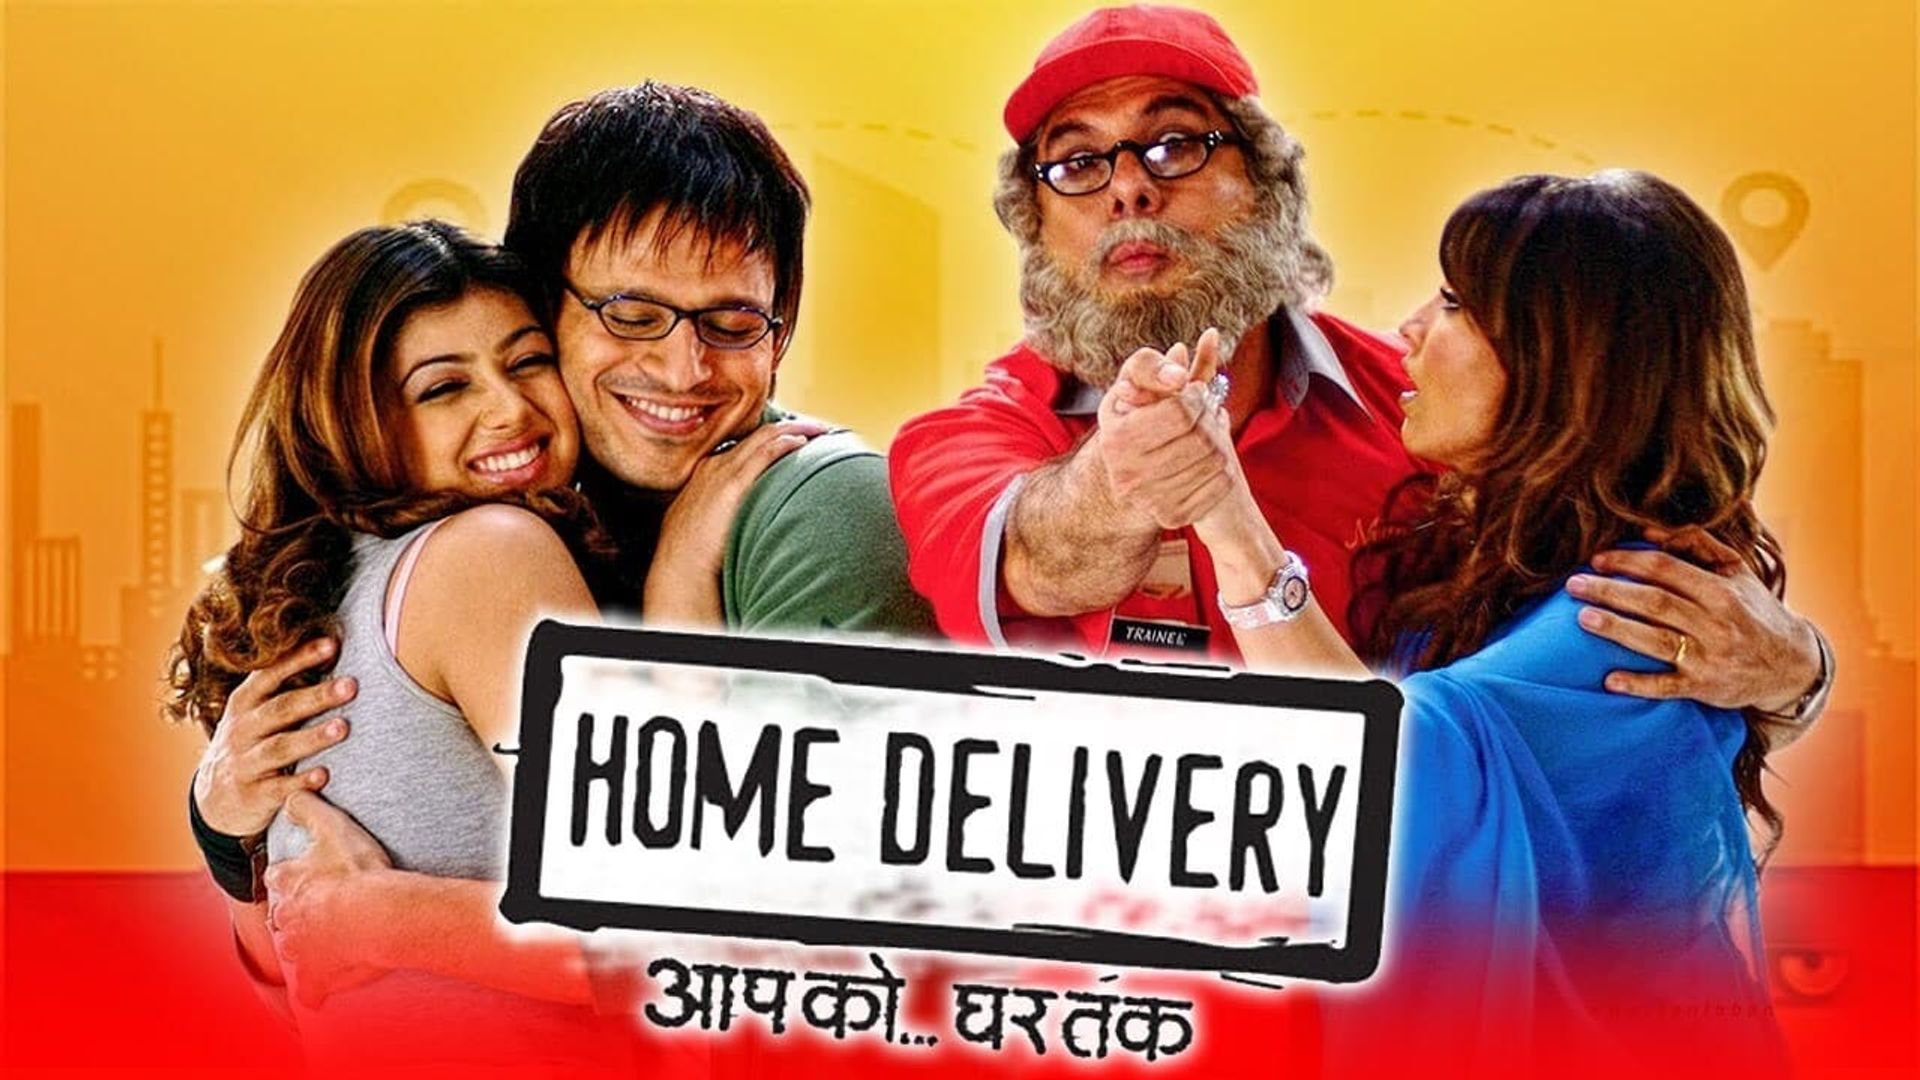 Home Delivery (2005) - Where to Watch It Streaming Online | Reelgood